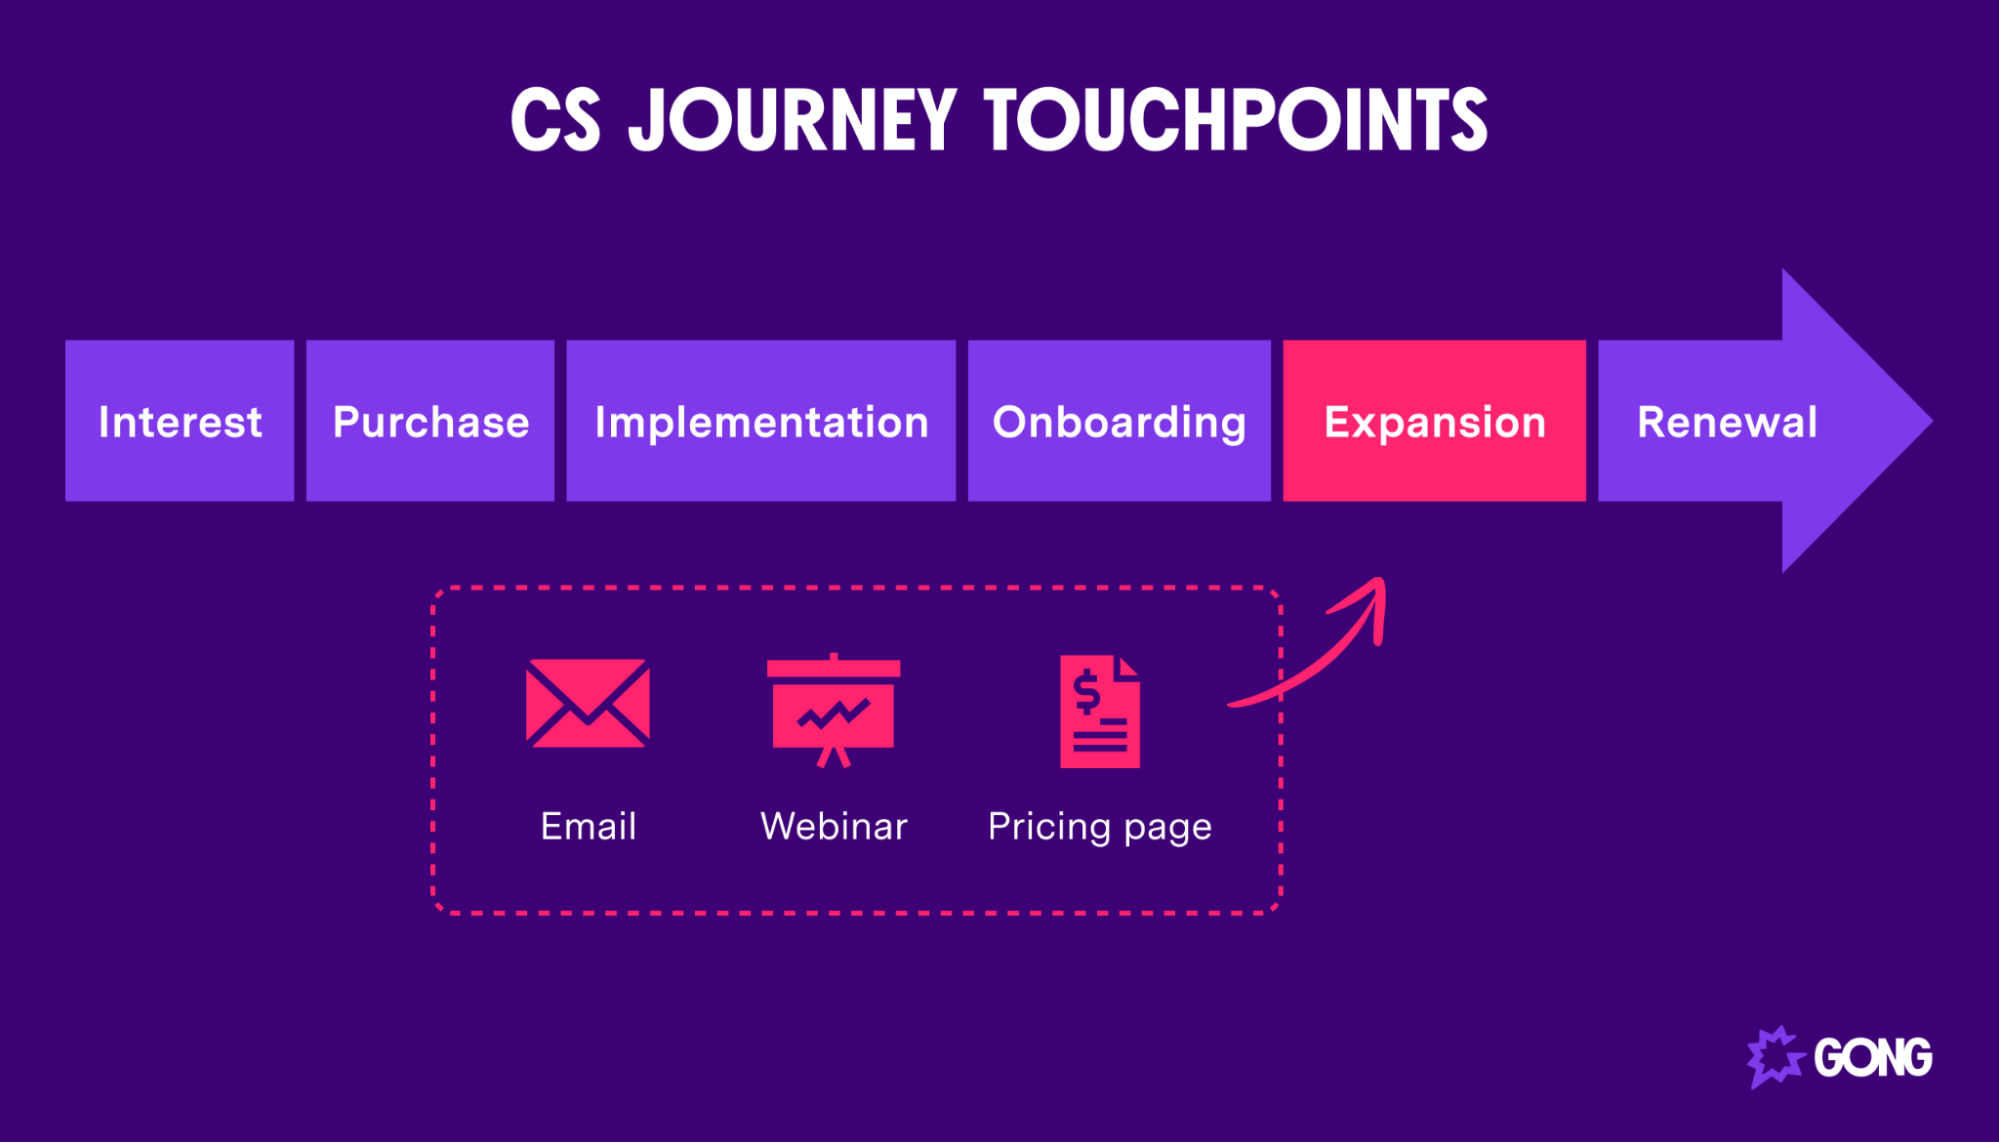 Touchpoints in a CS journey map